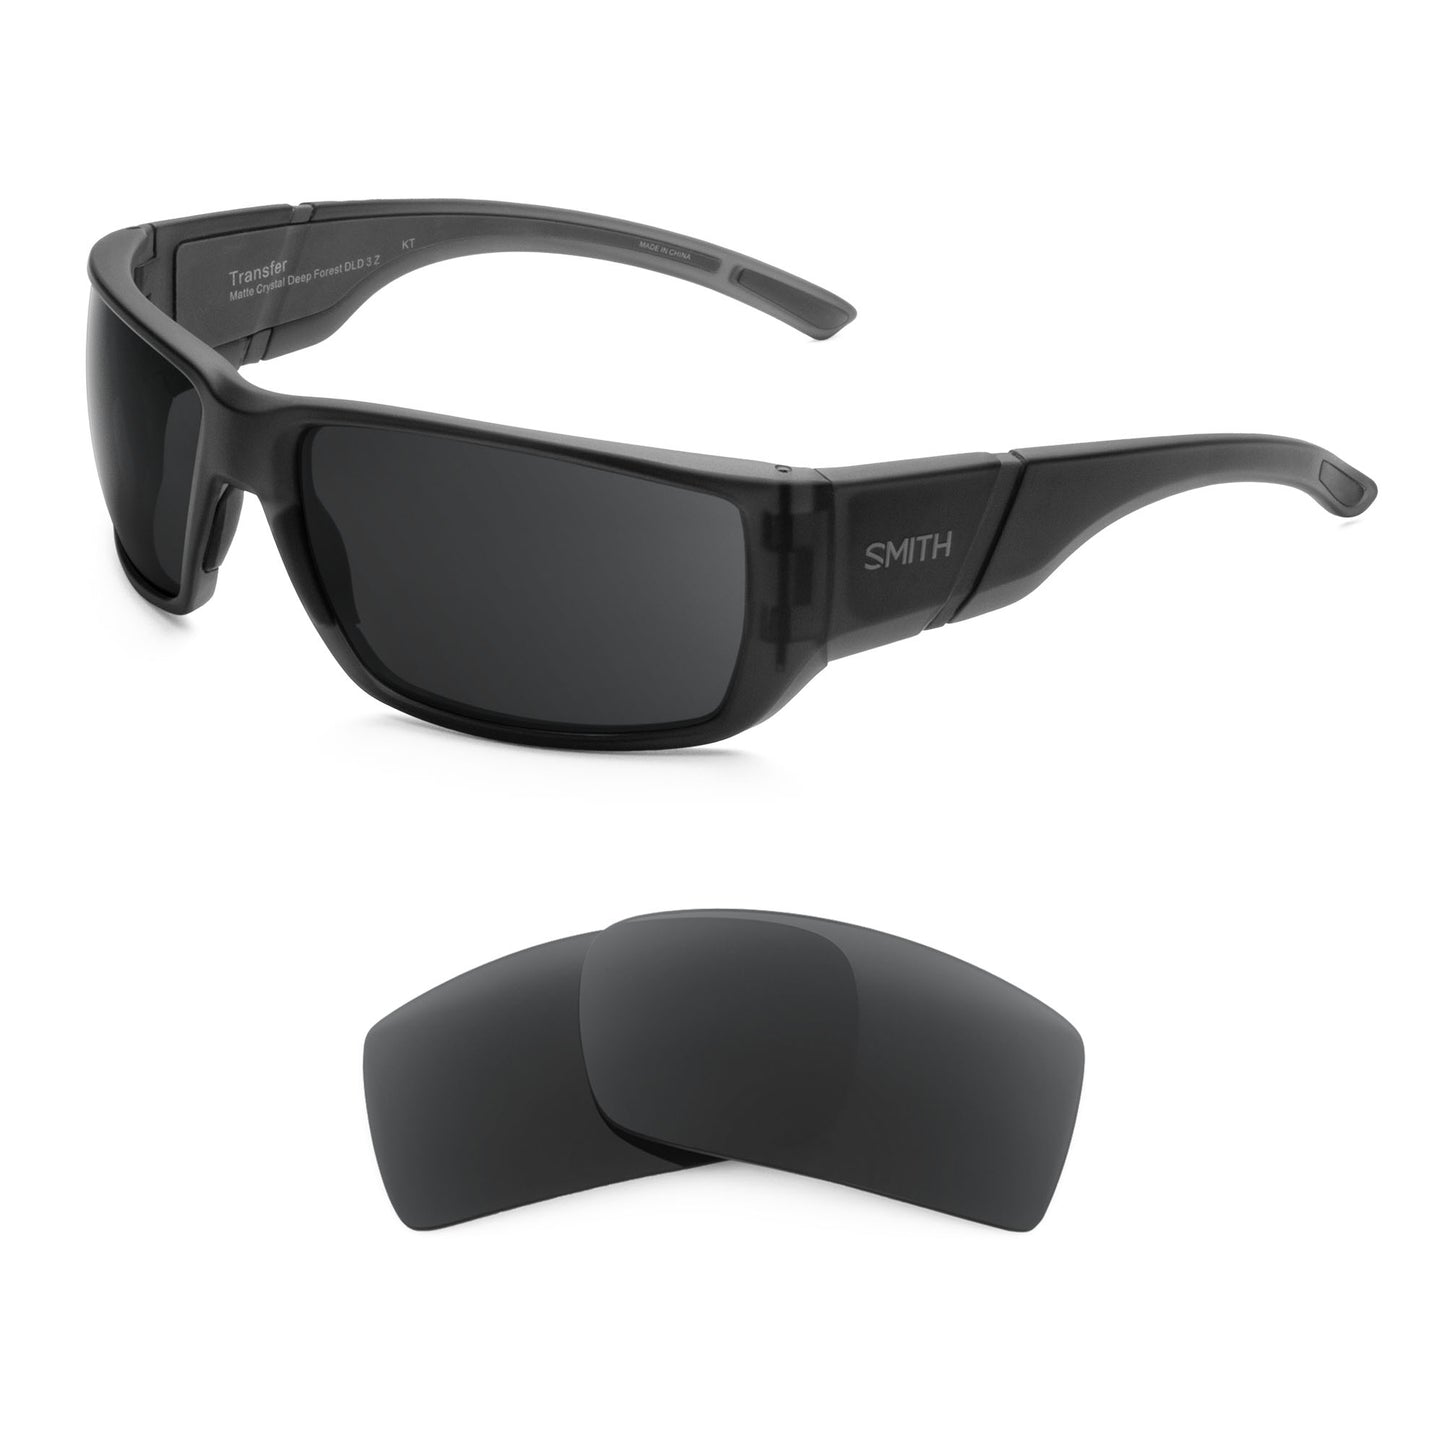 Smith Transfer sunglasses with replacement lenses